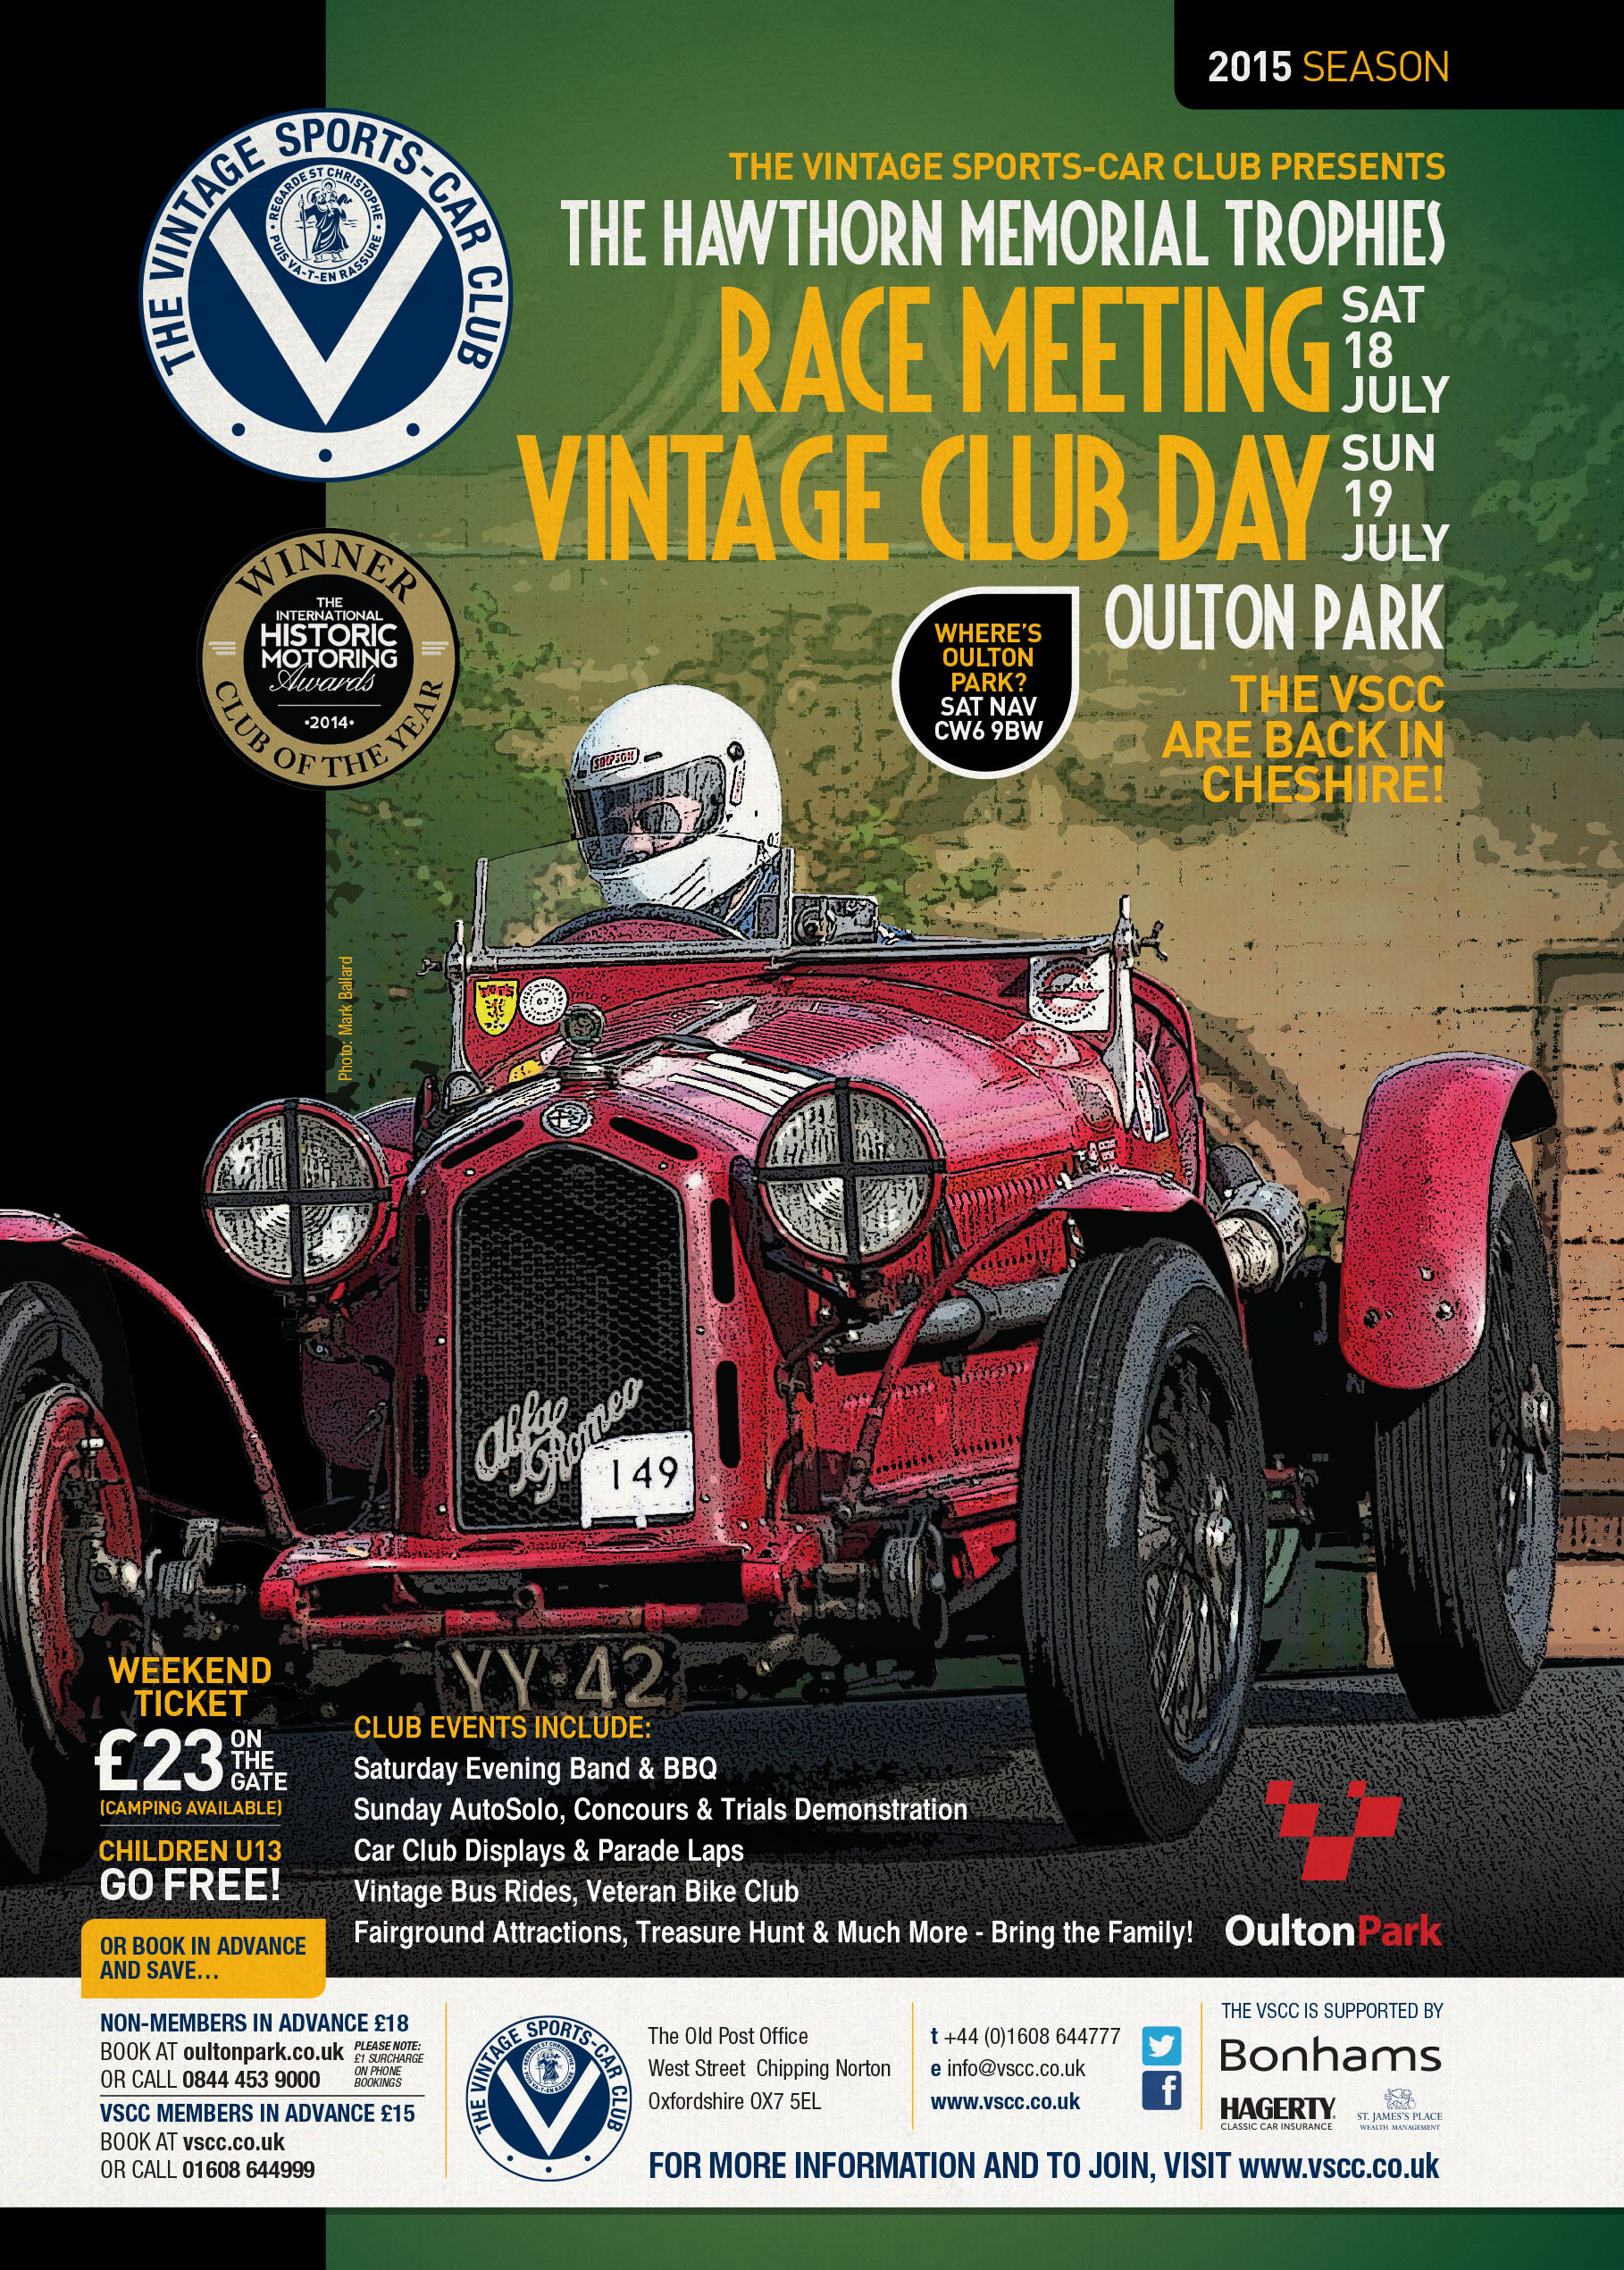 Entries Closed for VSCC Oulton Park Race Meeting - Call Now for late entry availability cover